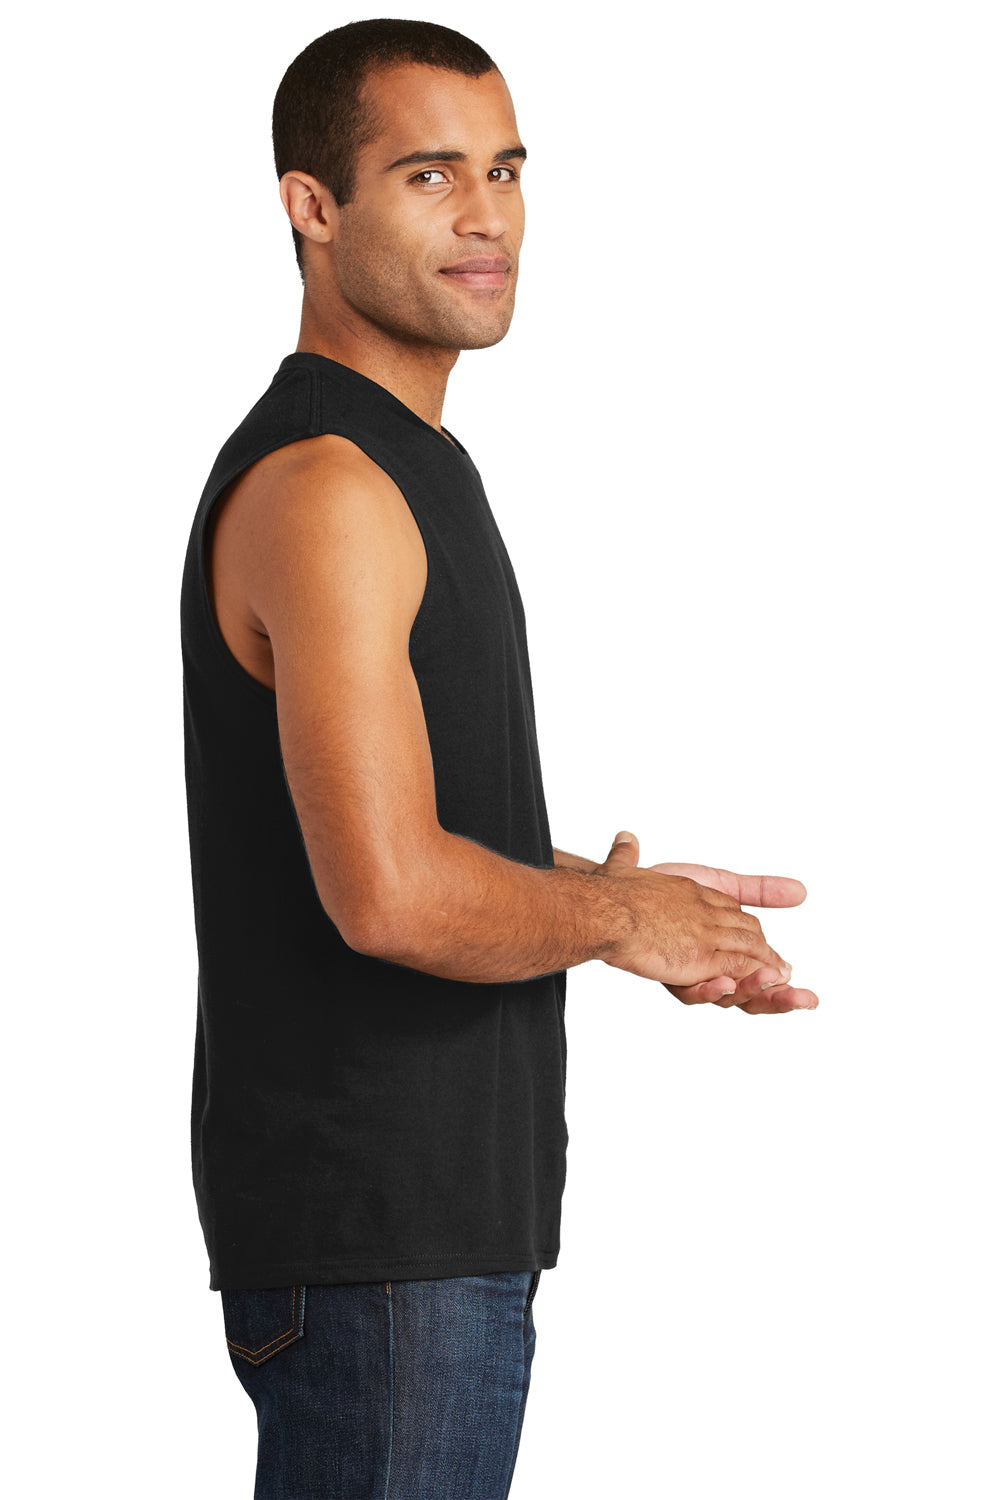 District DT6300 Mens Very Important Muscle Tank Top Black Side